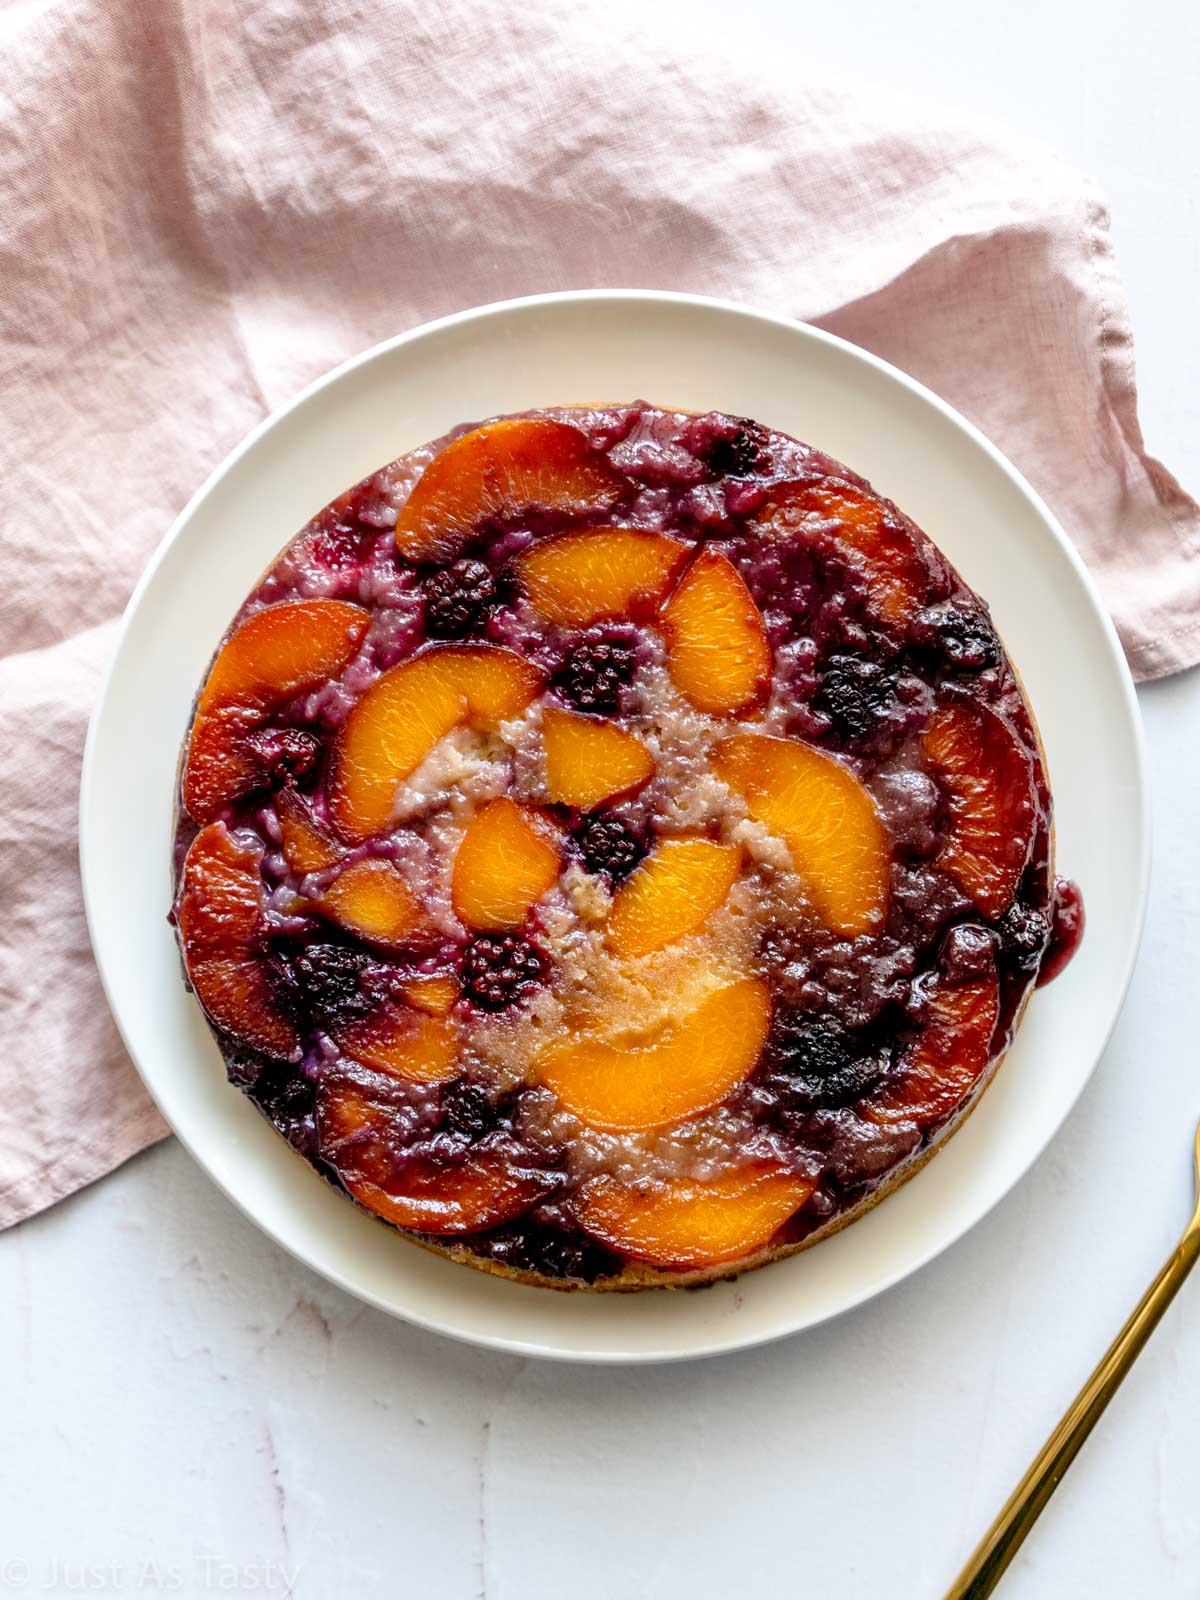 Peach upside down cake topped with blackberries and peach slices.